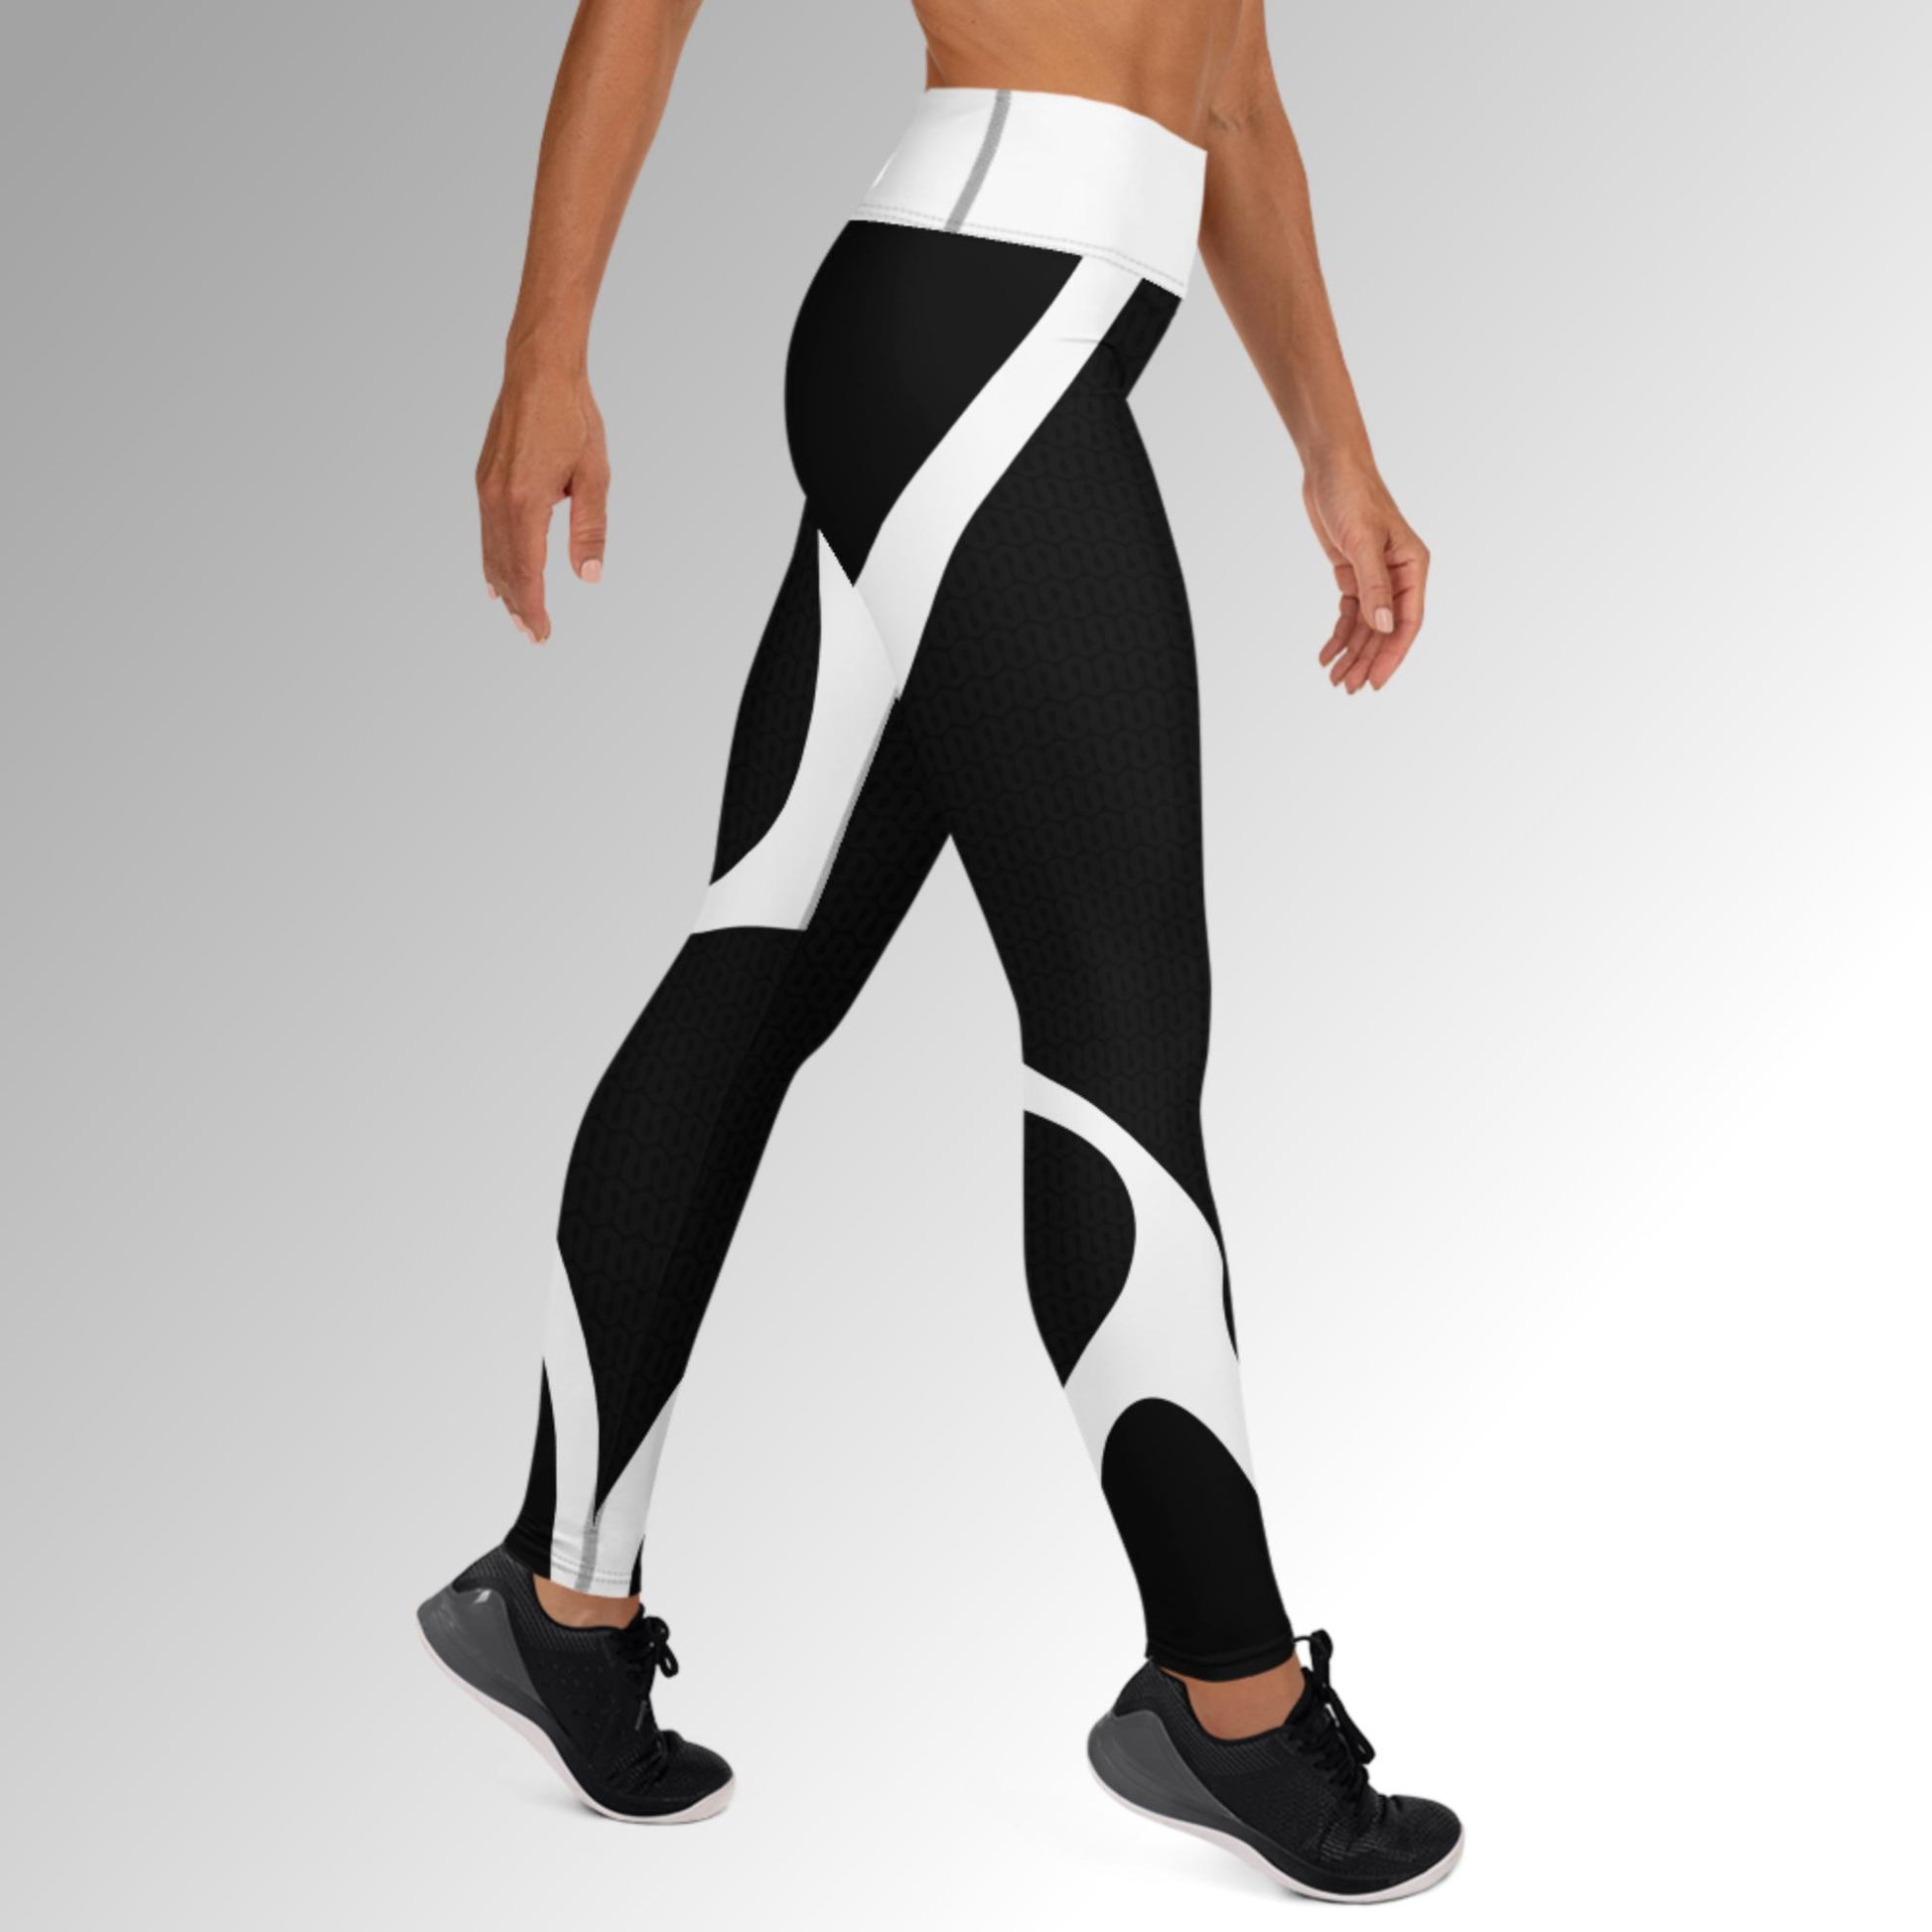 SILVER SEQUENCE Reflective Yoga Pants / Leggings / Resonate Yoga / Men /  Women / With Pockets / Pattern /plus Size /all Size / Workout 